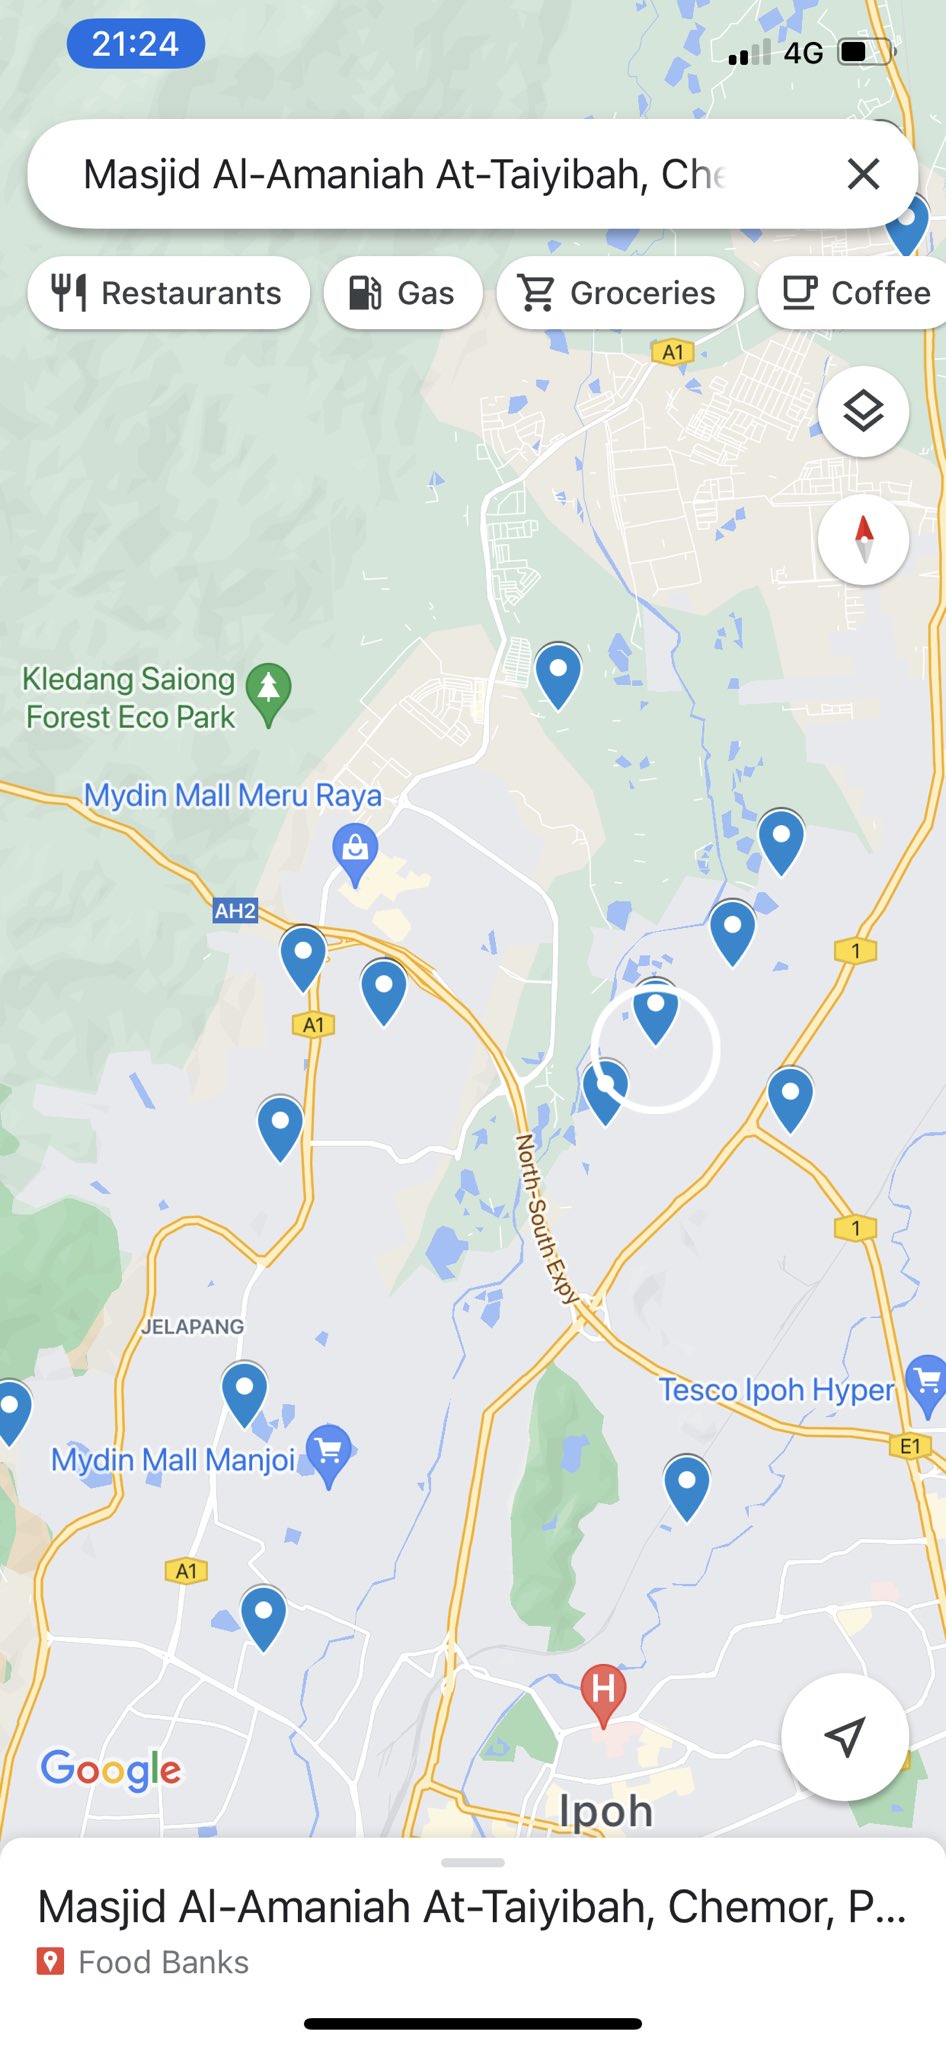 Food bank locations on Google maps